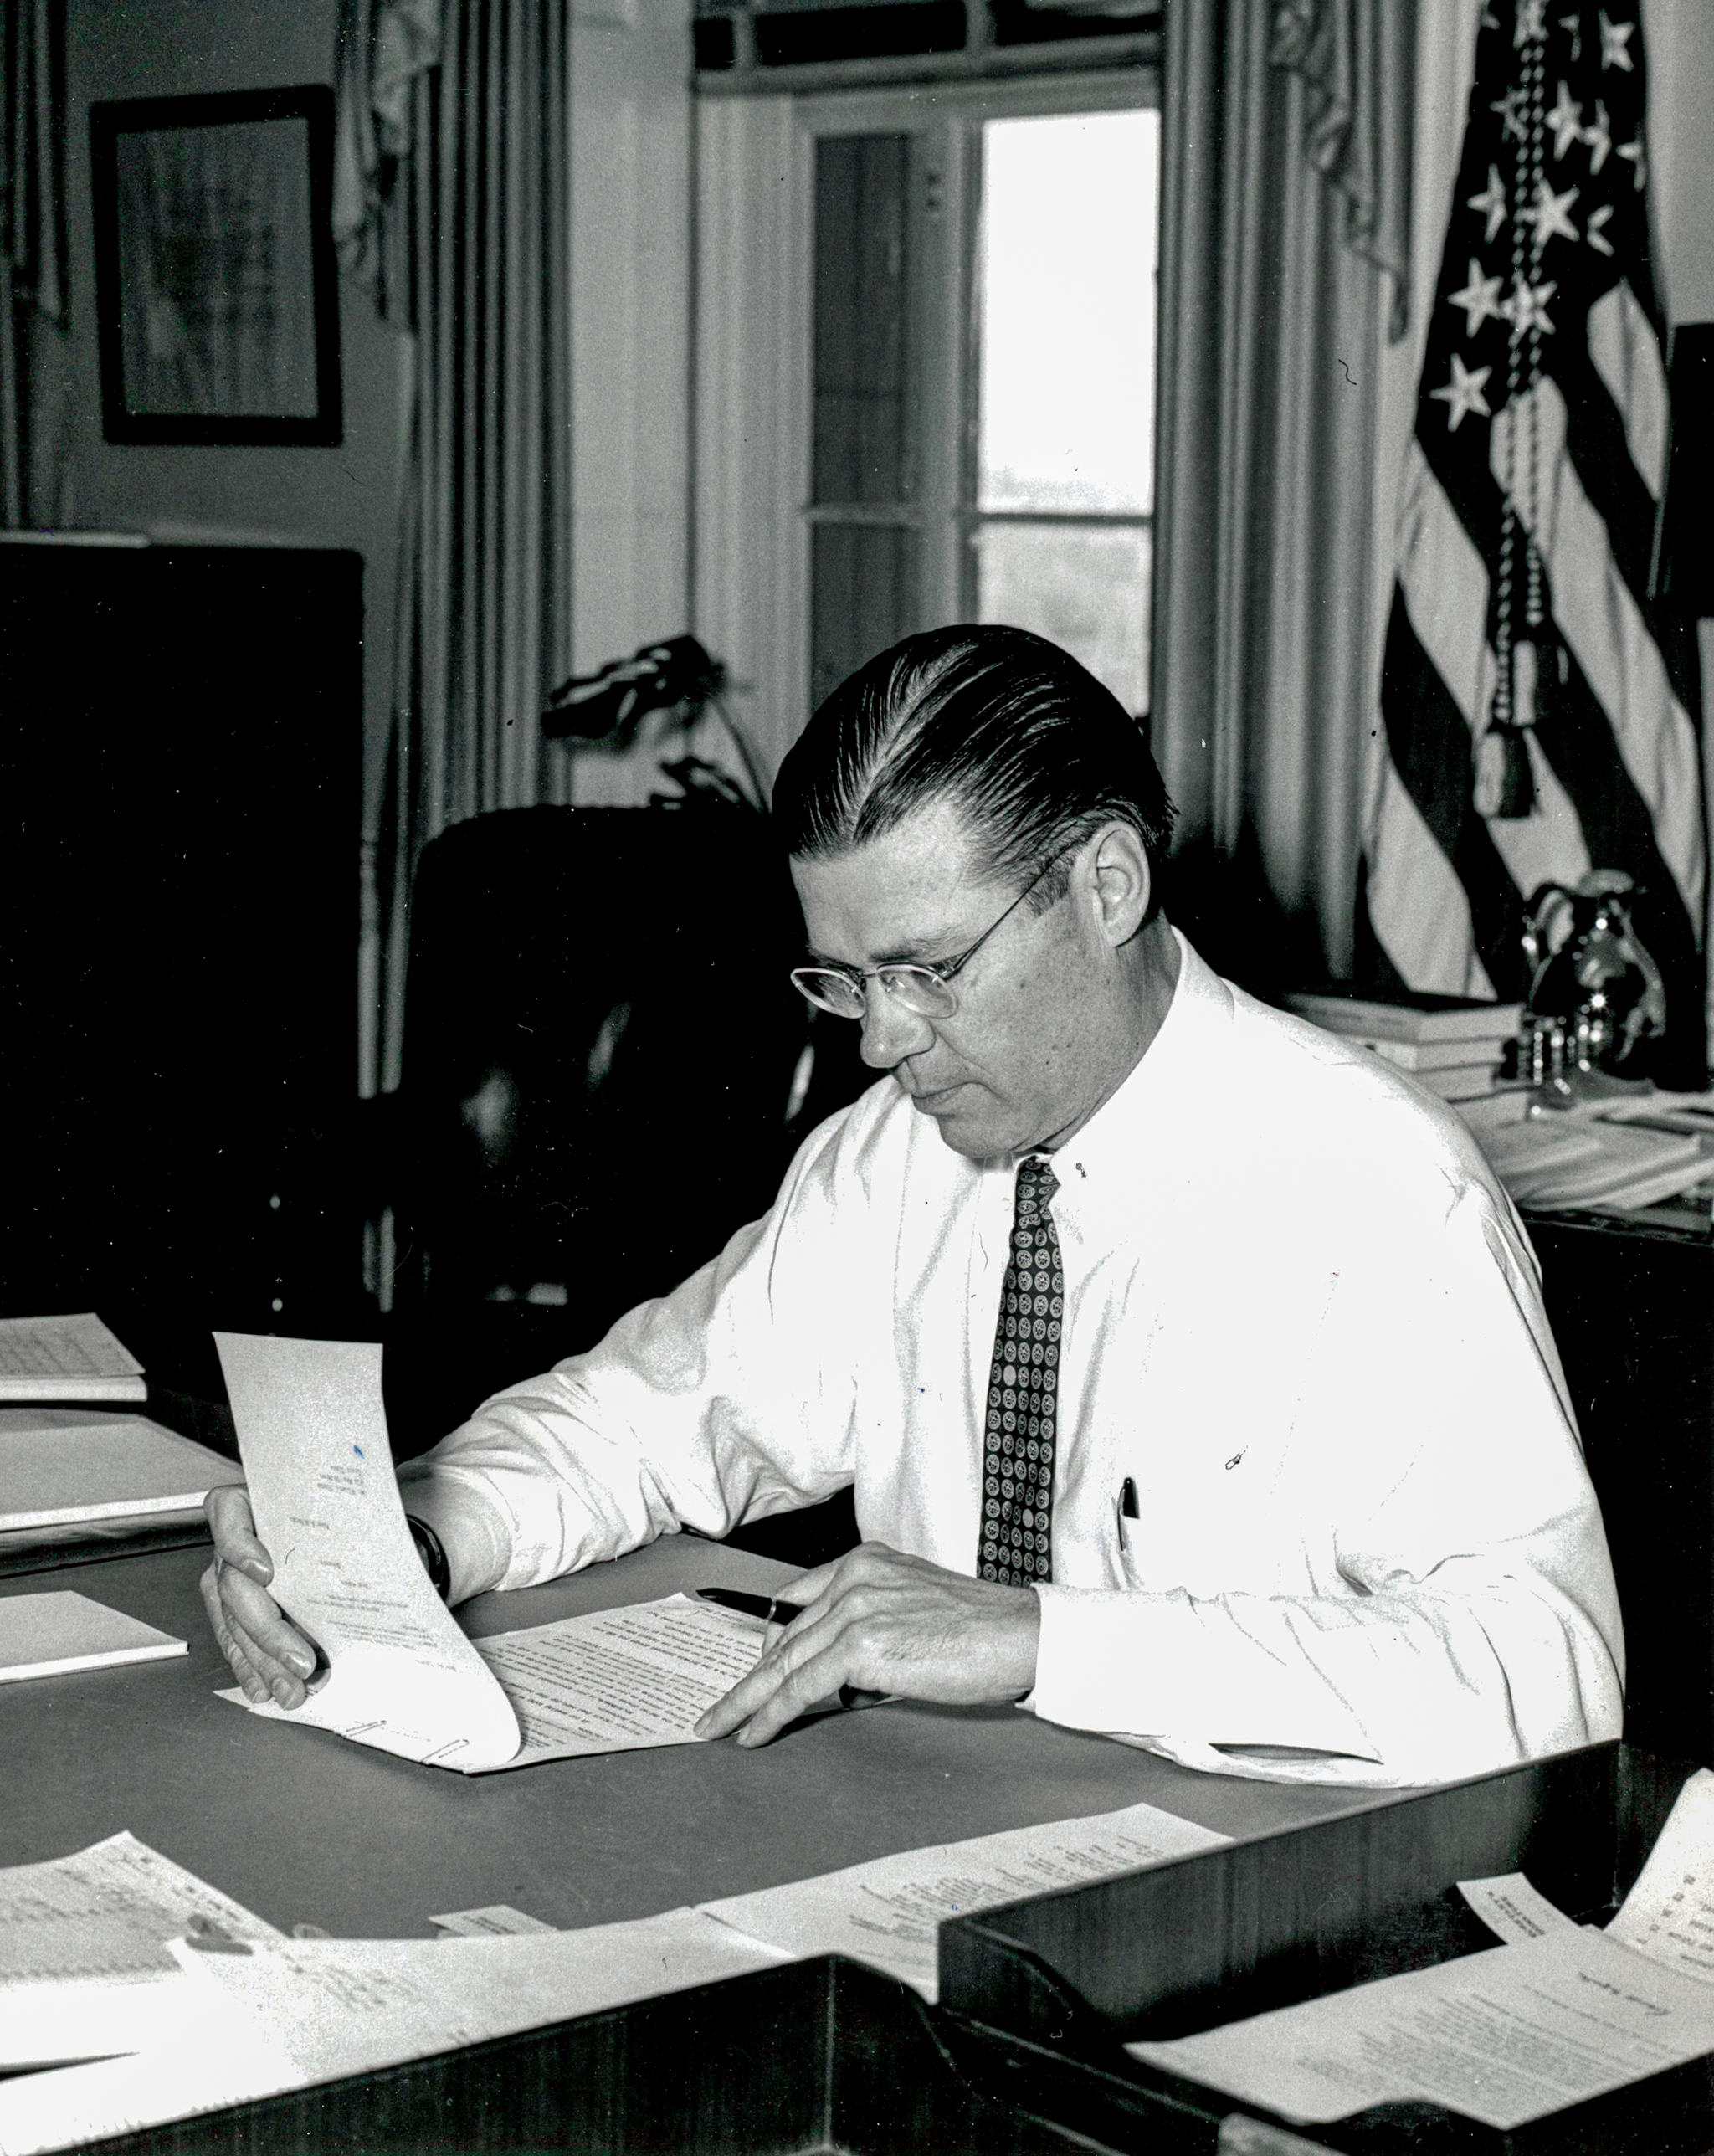 Secretary of Defense Robert McNamara seated in his office at the White House